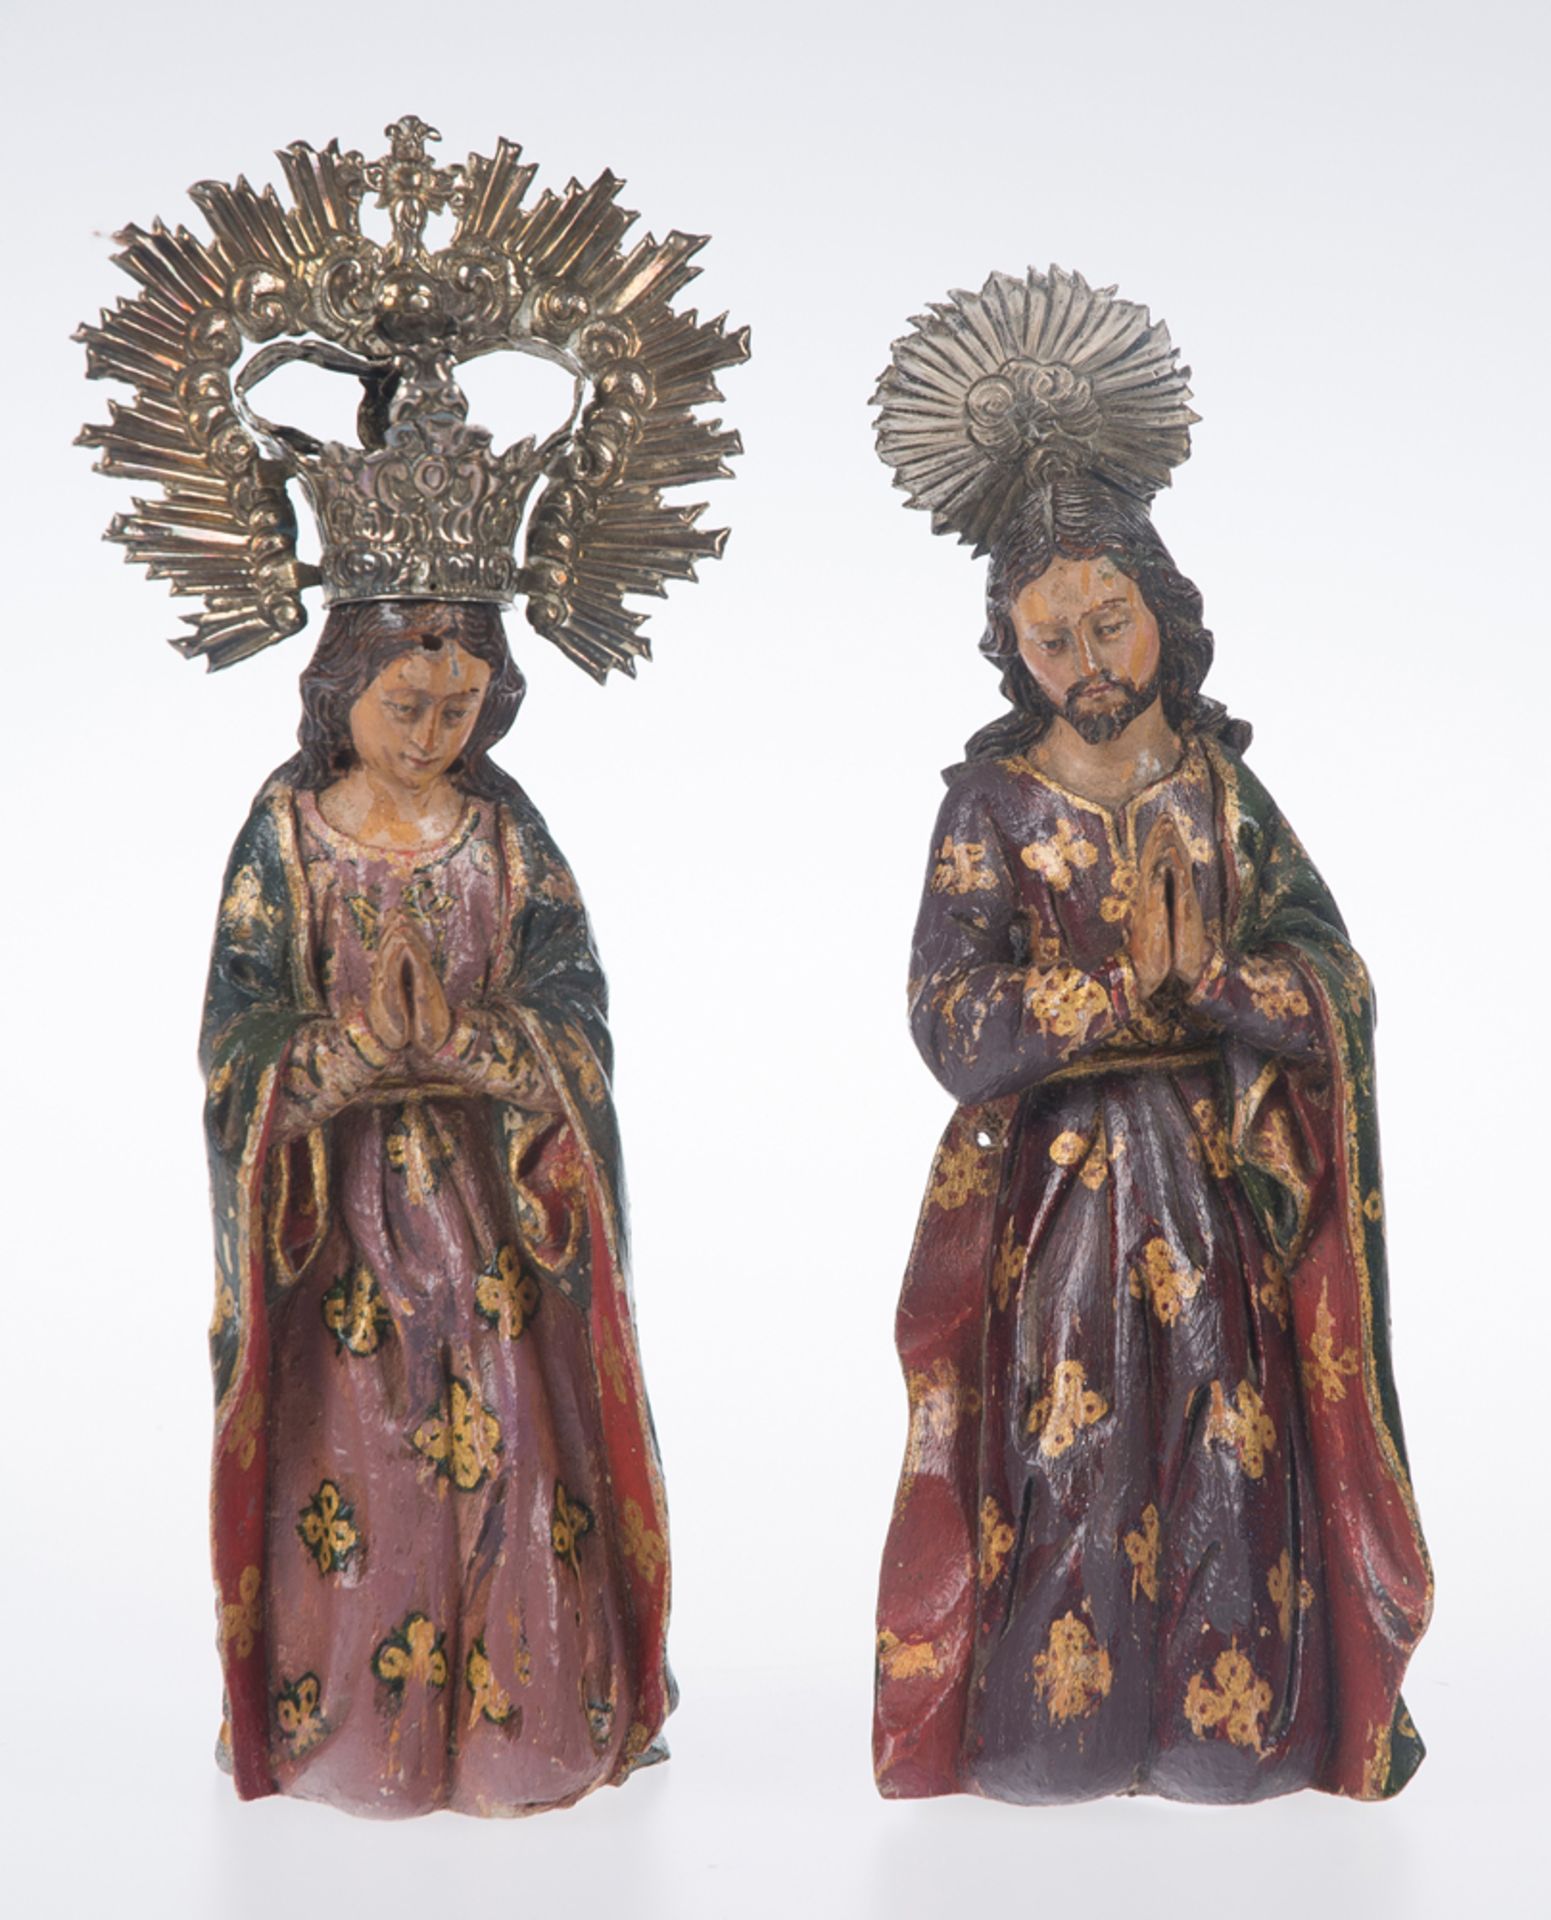 "Saint Joseph and the Virgin Mary". Pair of carved, gilded and polychromed wooden sculptures. Colo